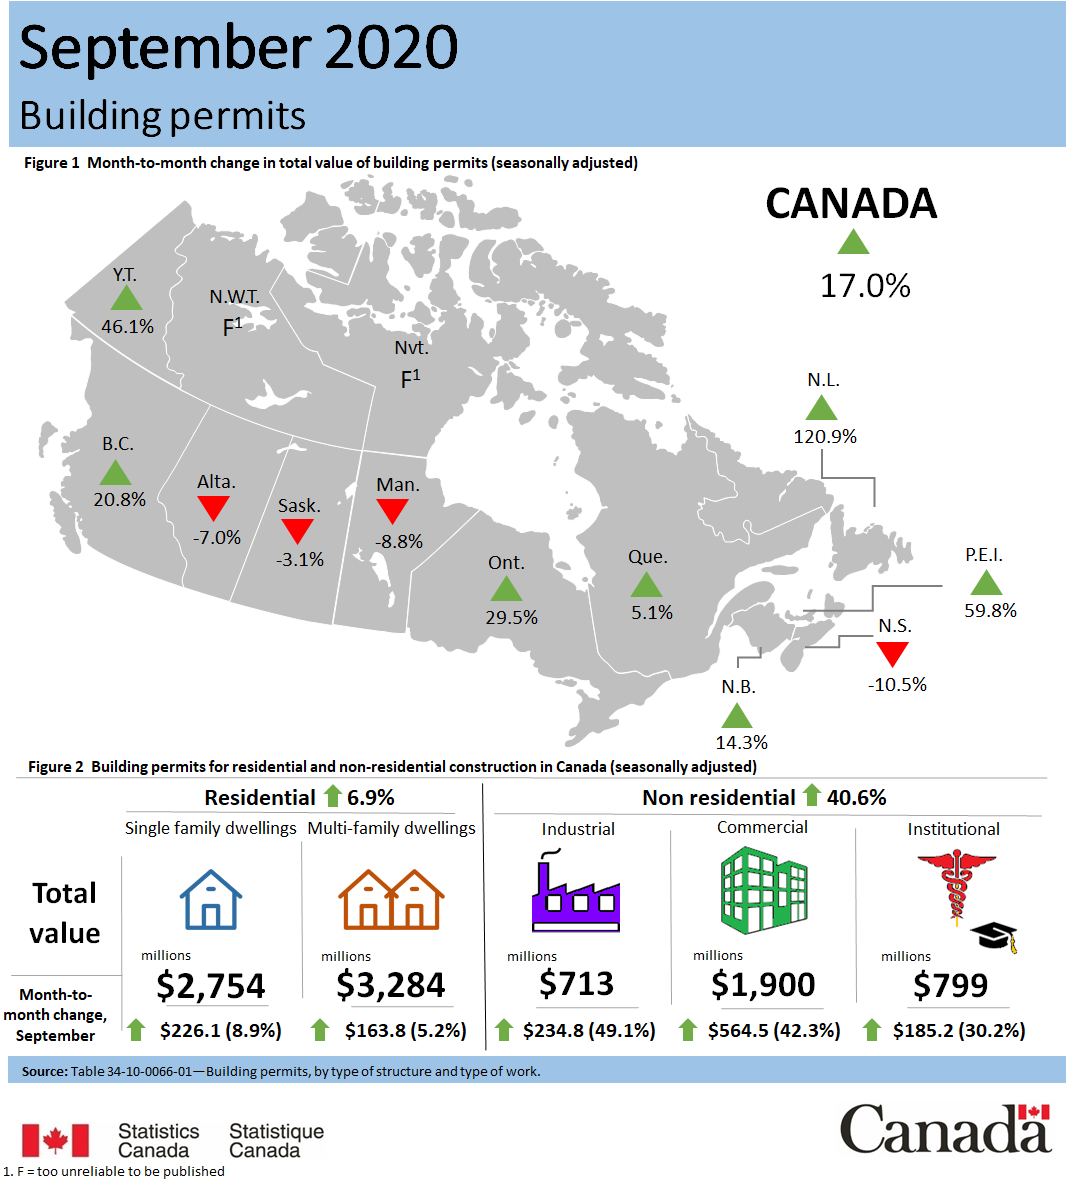 Thumbnail for Infographic 1: Building permits, September 2020